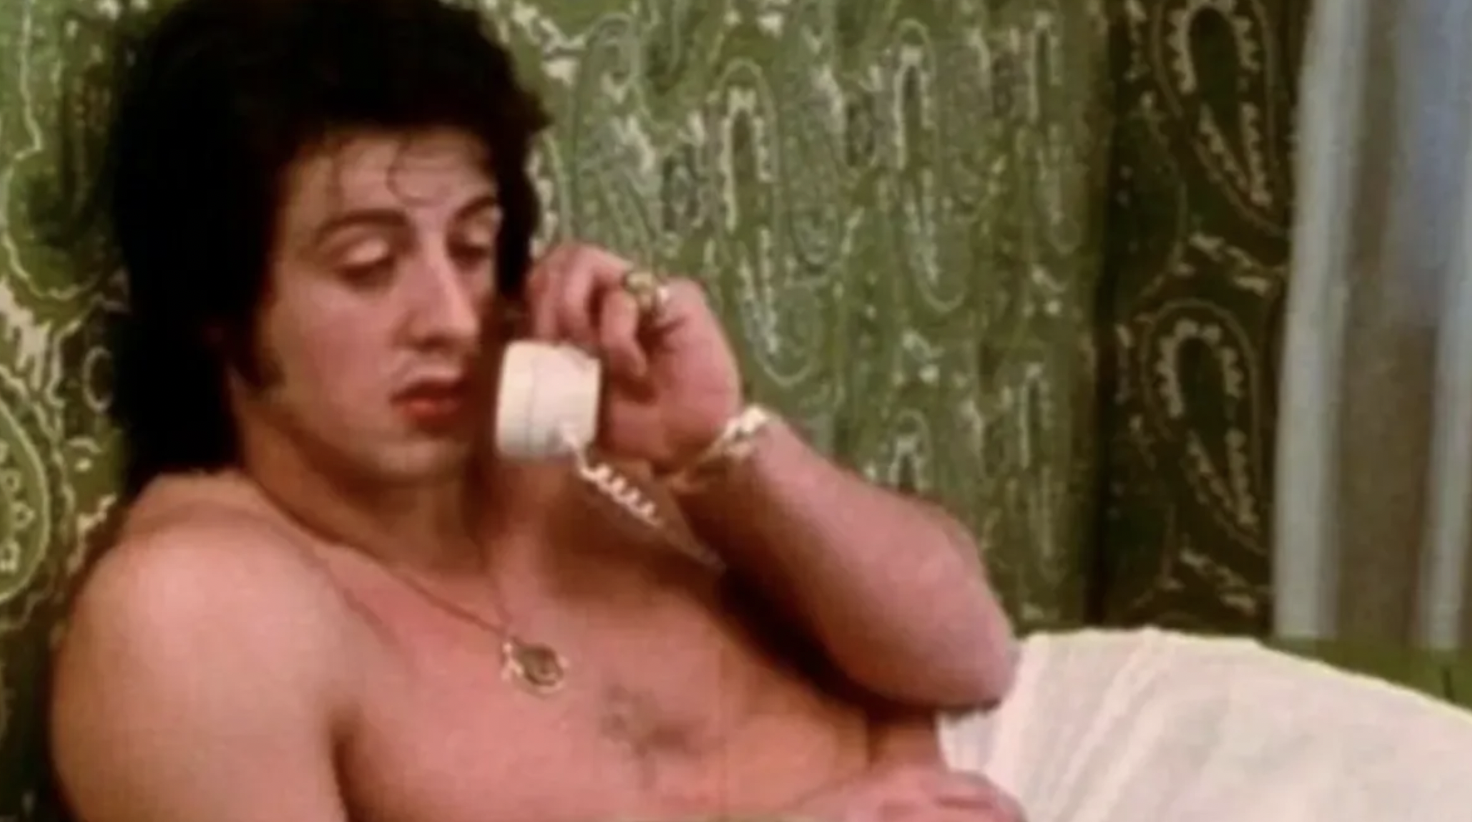 Considering his starring role in the 'Rocky' franchise, several fans were shocked to discover that Sylvester Stallone appeared in an adult film early in his career, a decision he said stemmed from desperation.  "It was either do that movie or rob someone because I was at the end—at the very end—of my rope,” Stallone said of the 1970 film, one he purported would warrant a measly PG rating by modern standards. “Instead of doing something desperate, I worked two days for $200 and got myself out of the bus station".